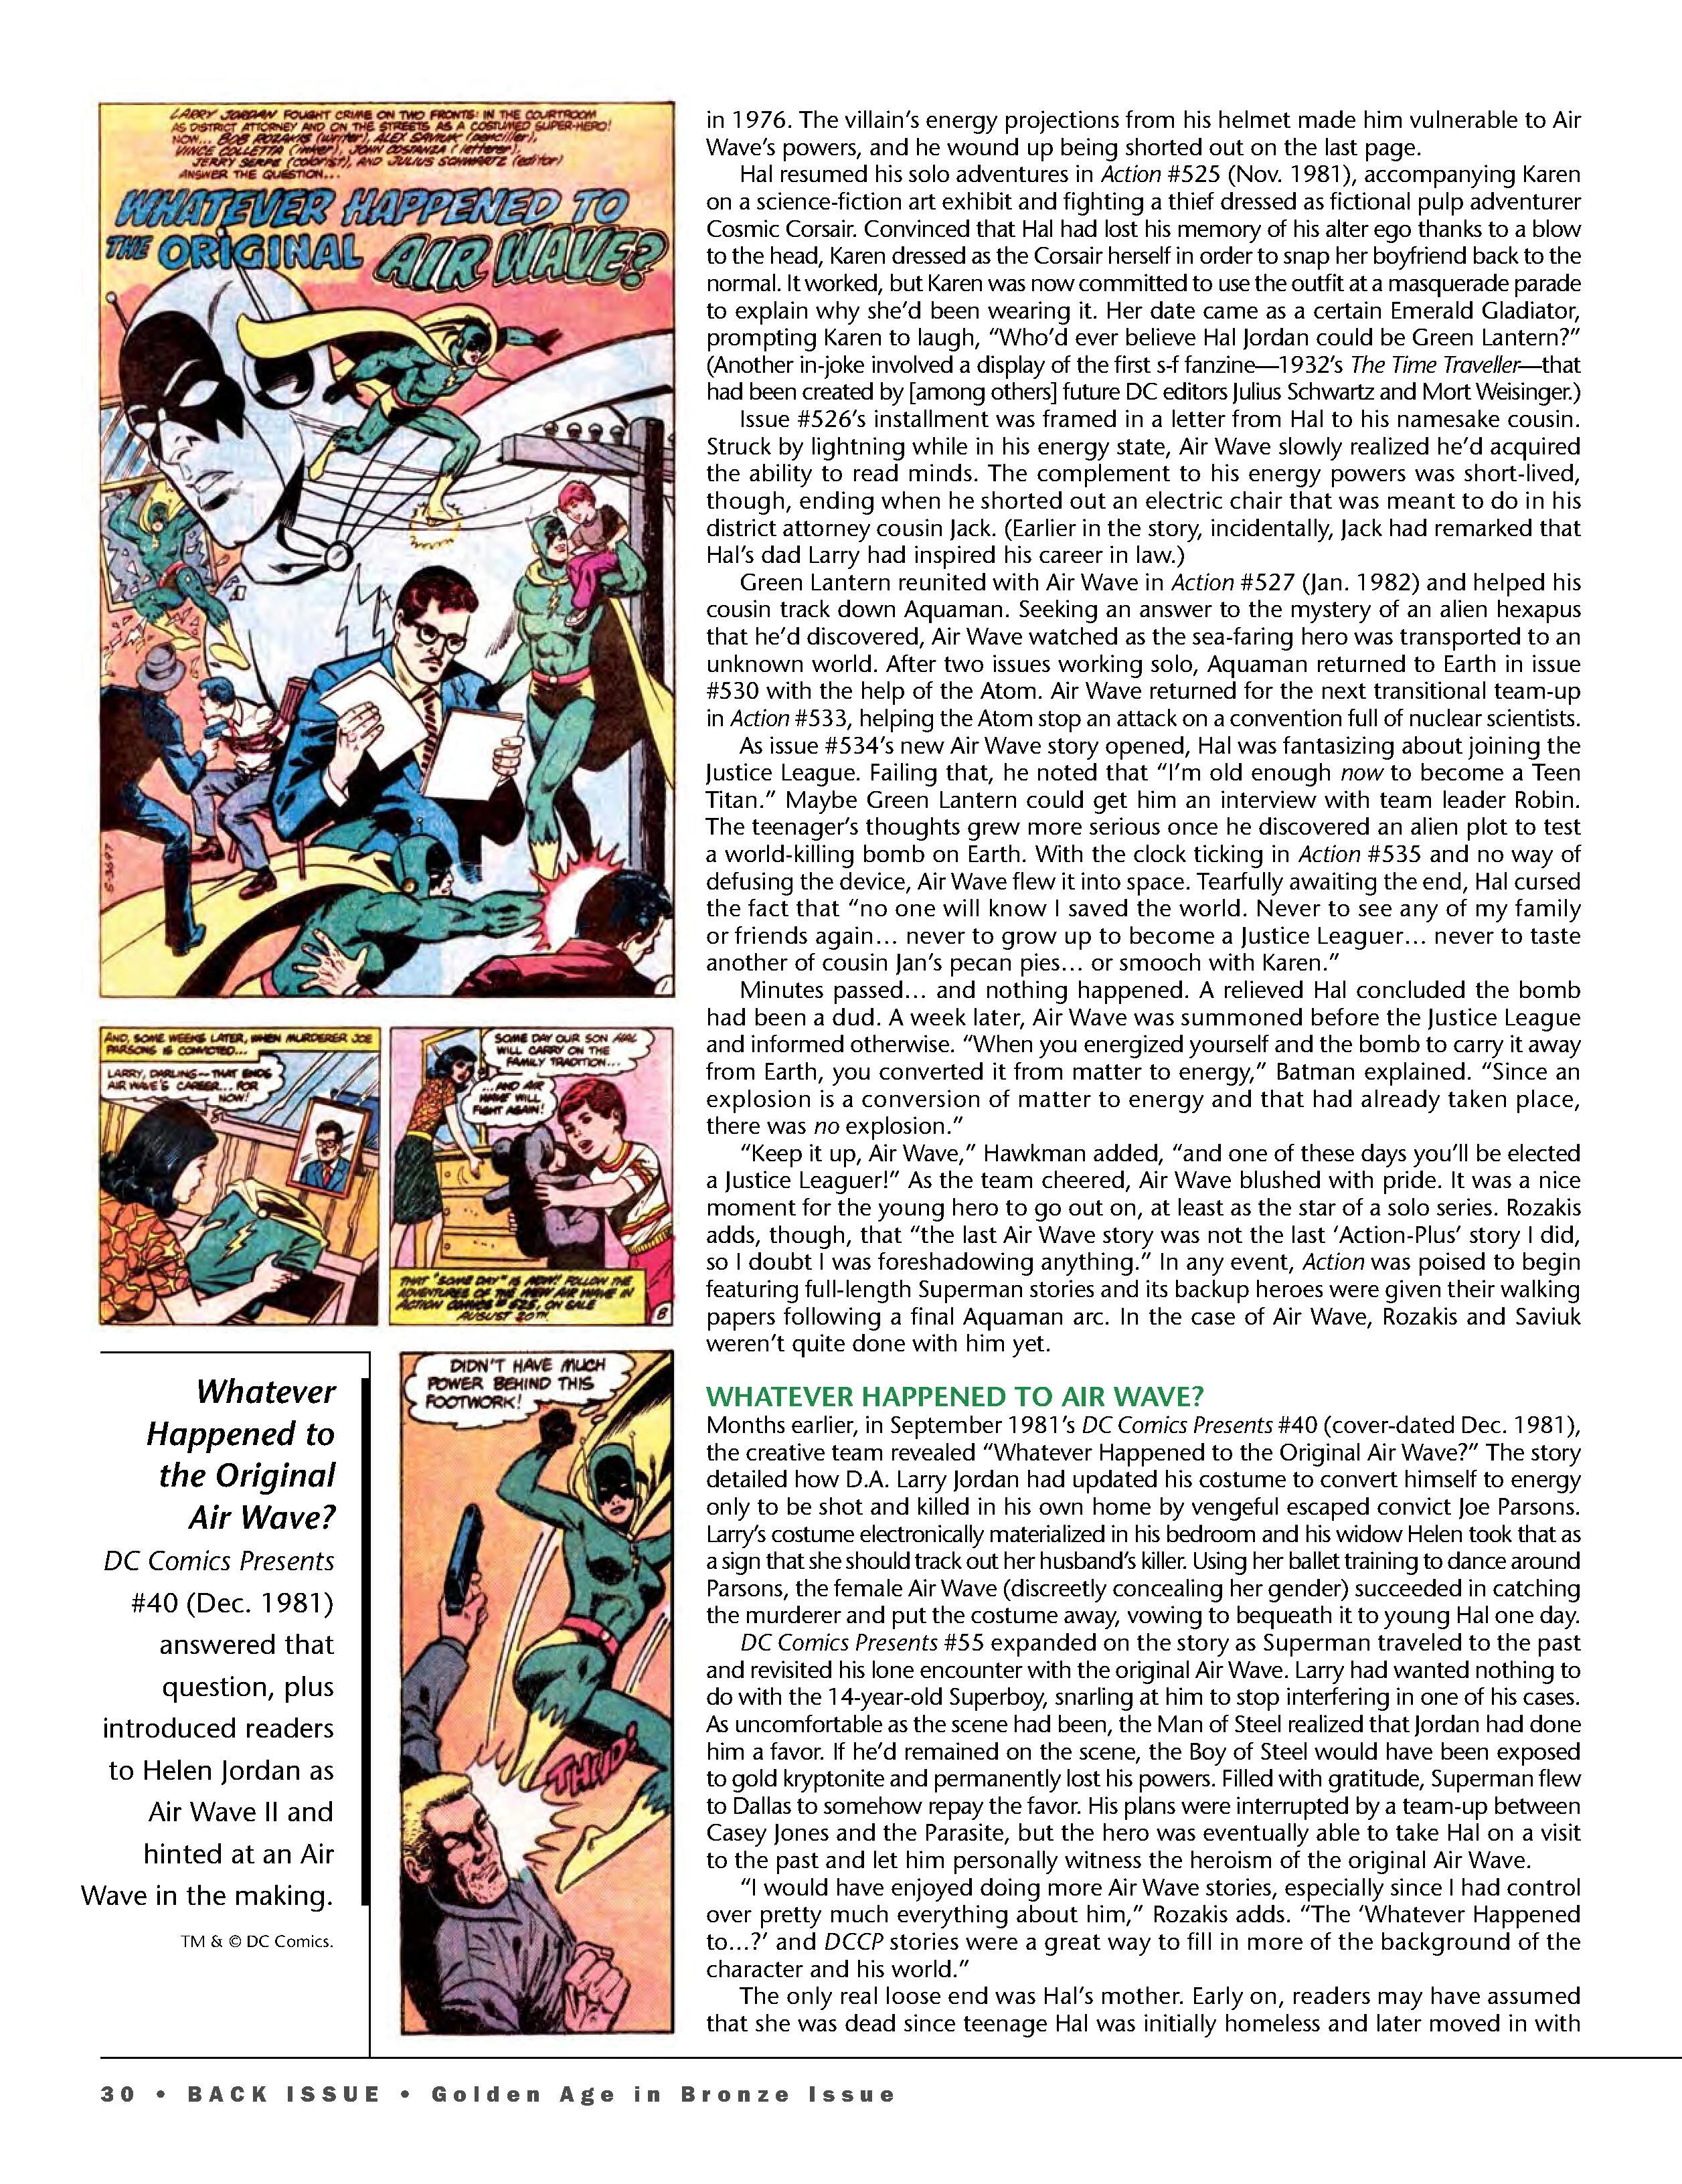 Read online Back Issue comic -  Issue #106 - 32